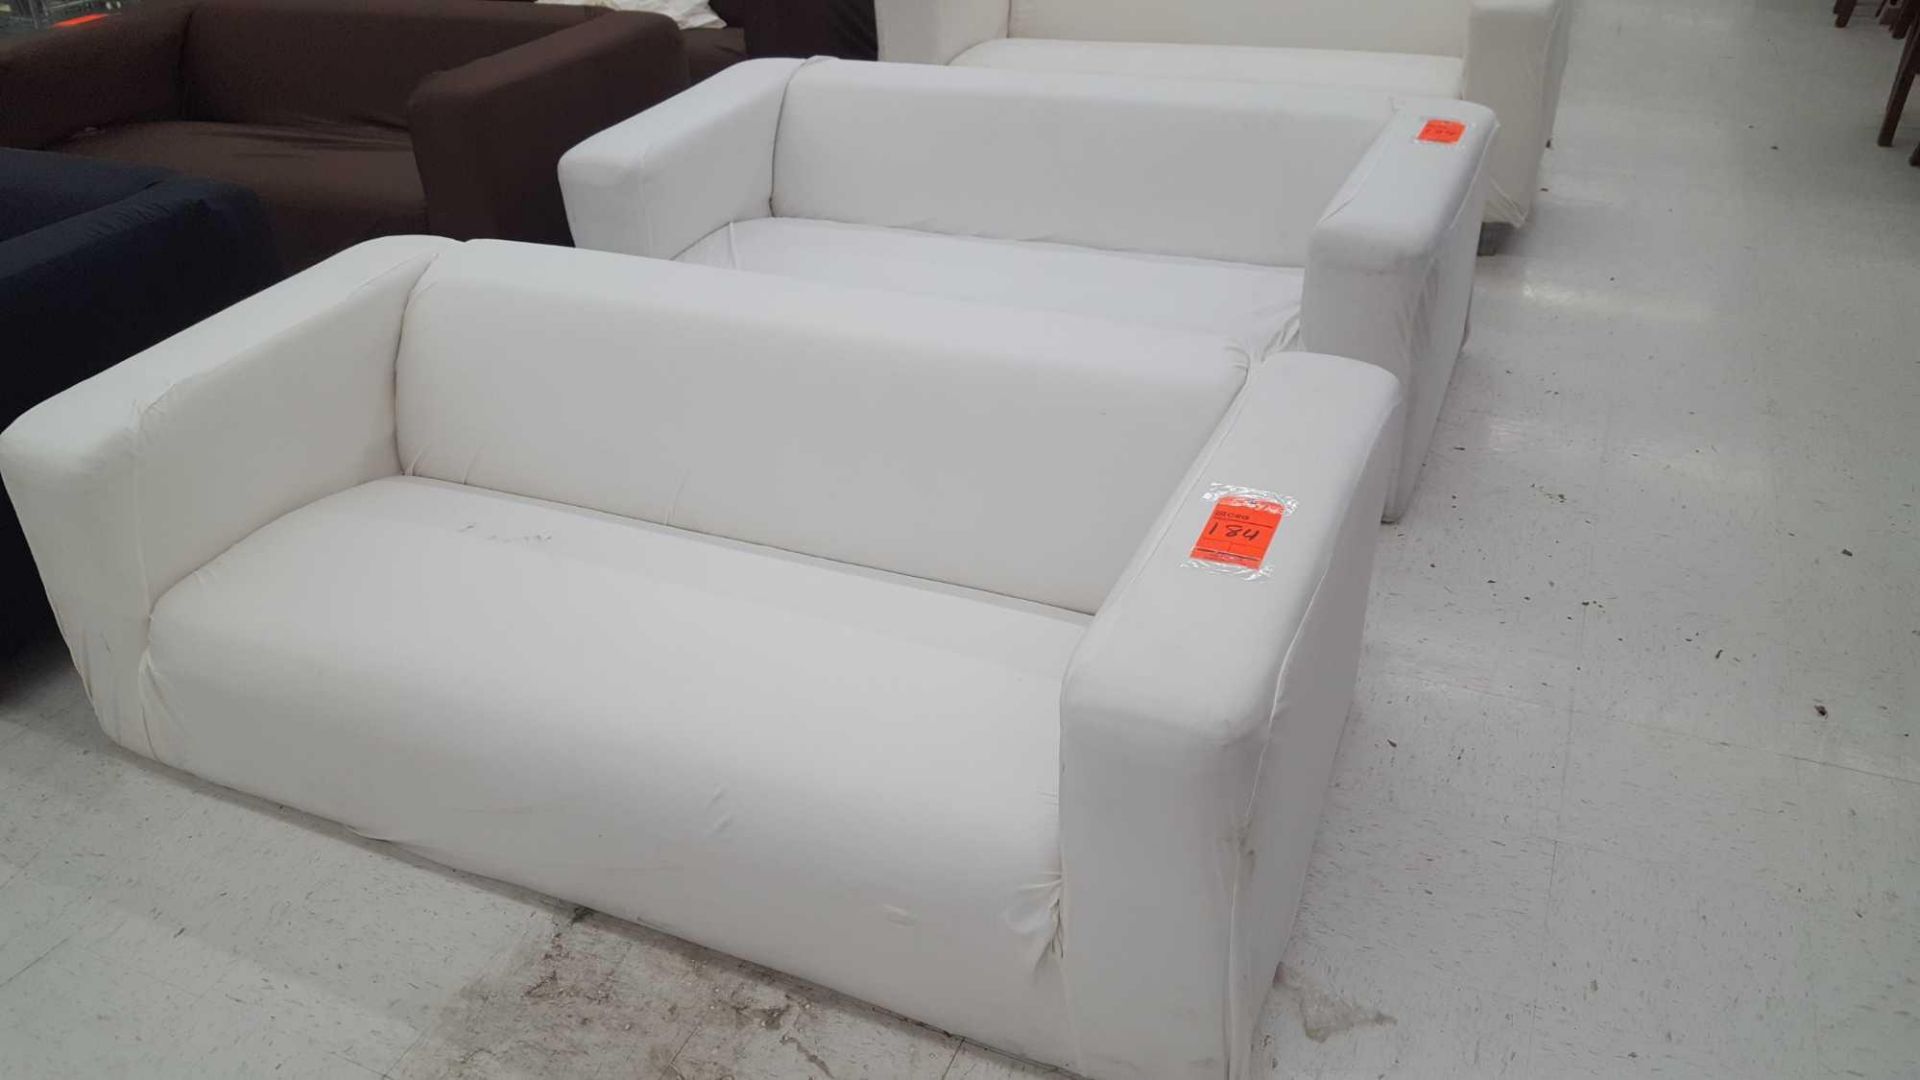 Lot of (3) assorted sofas with white slipcovers, no legs